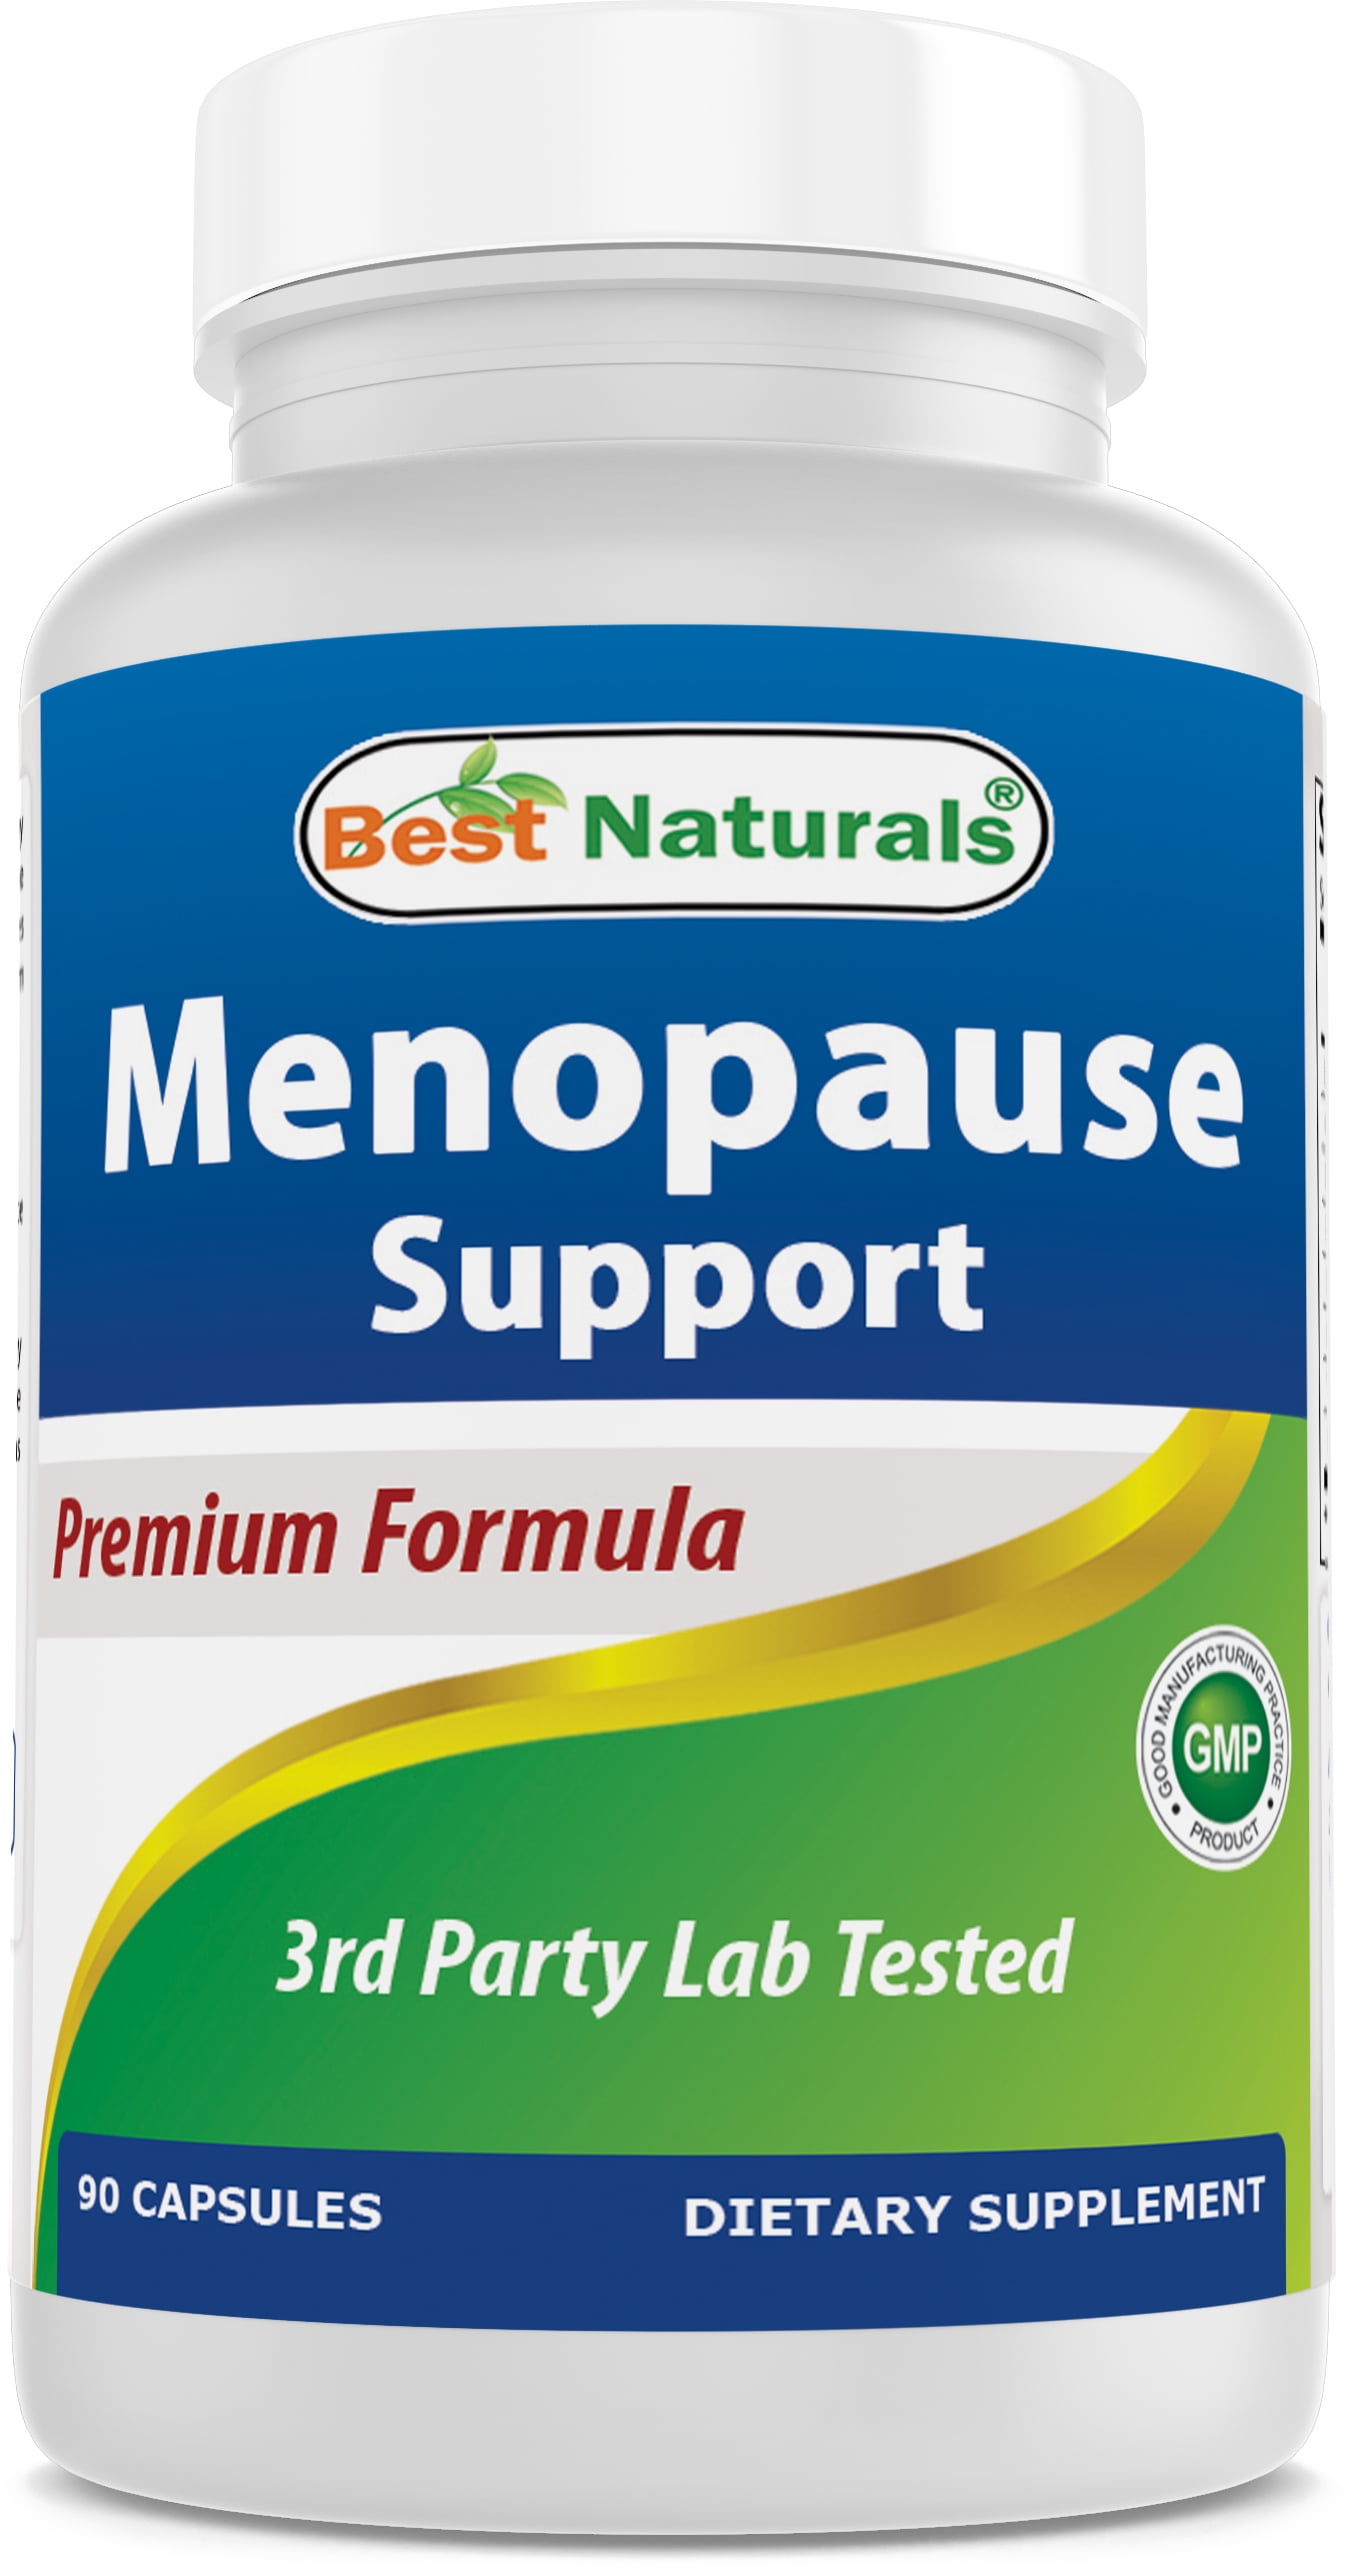 Menopause products